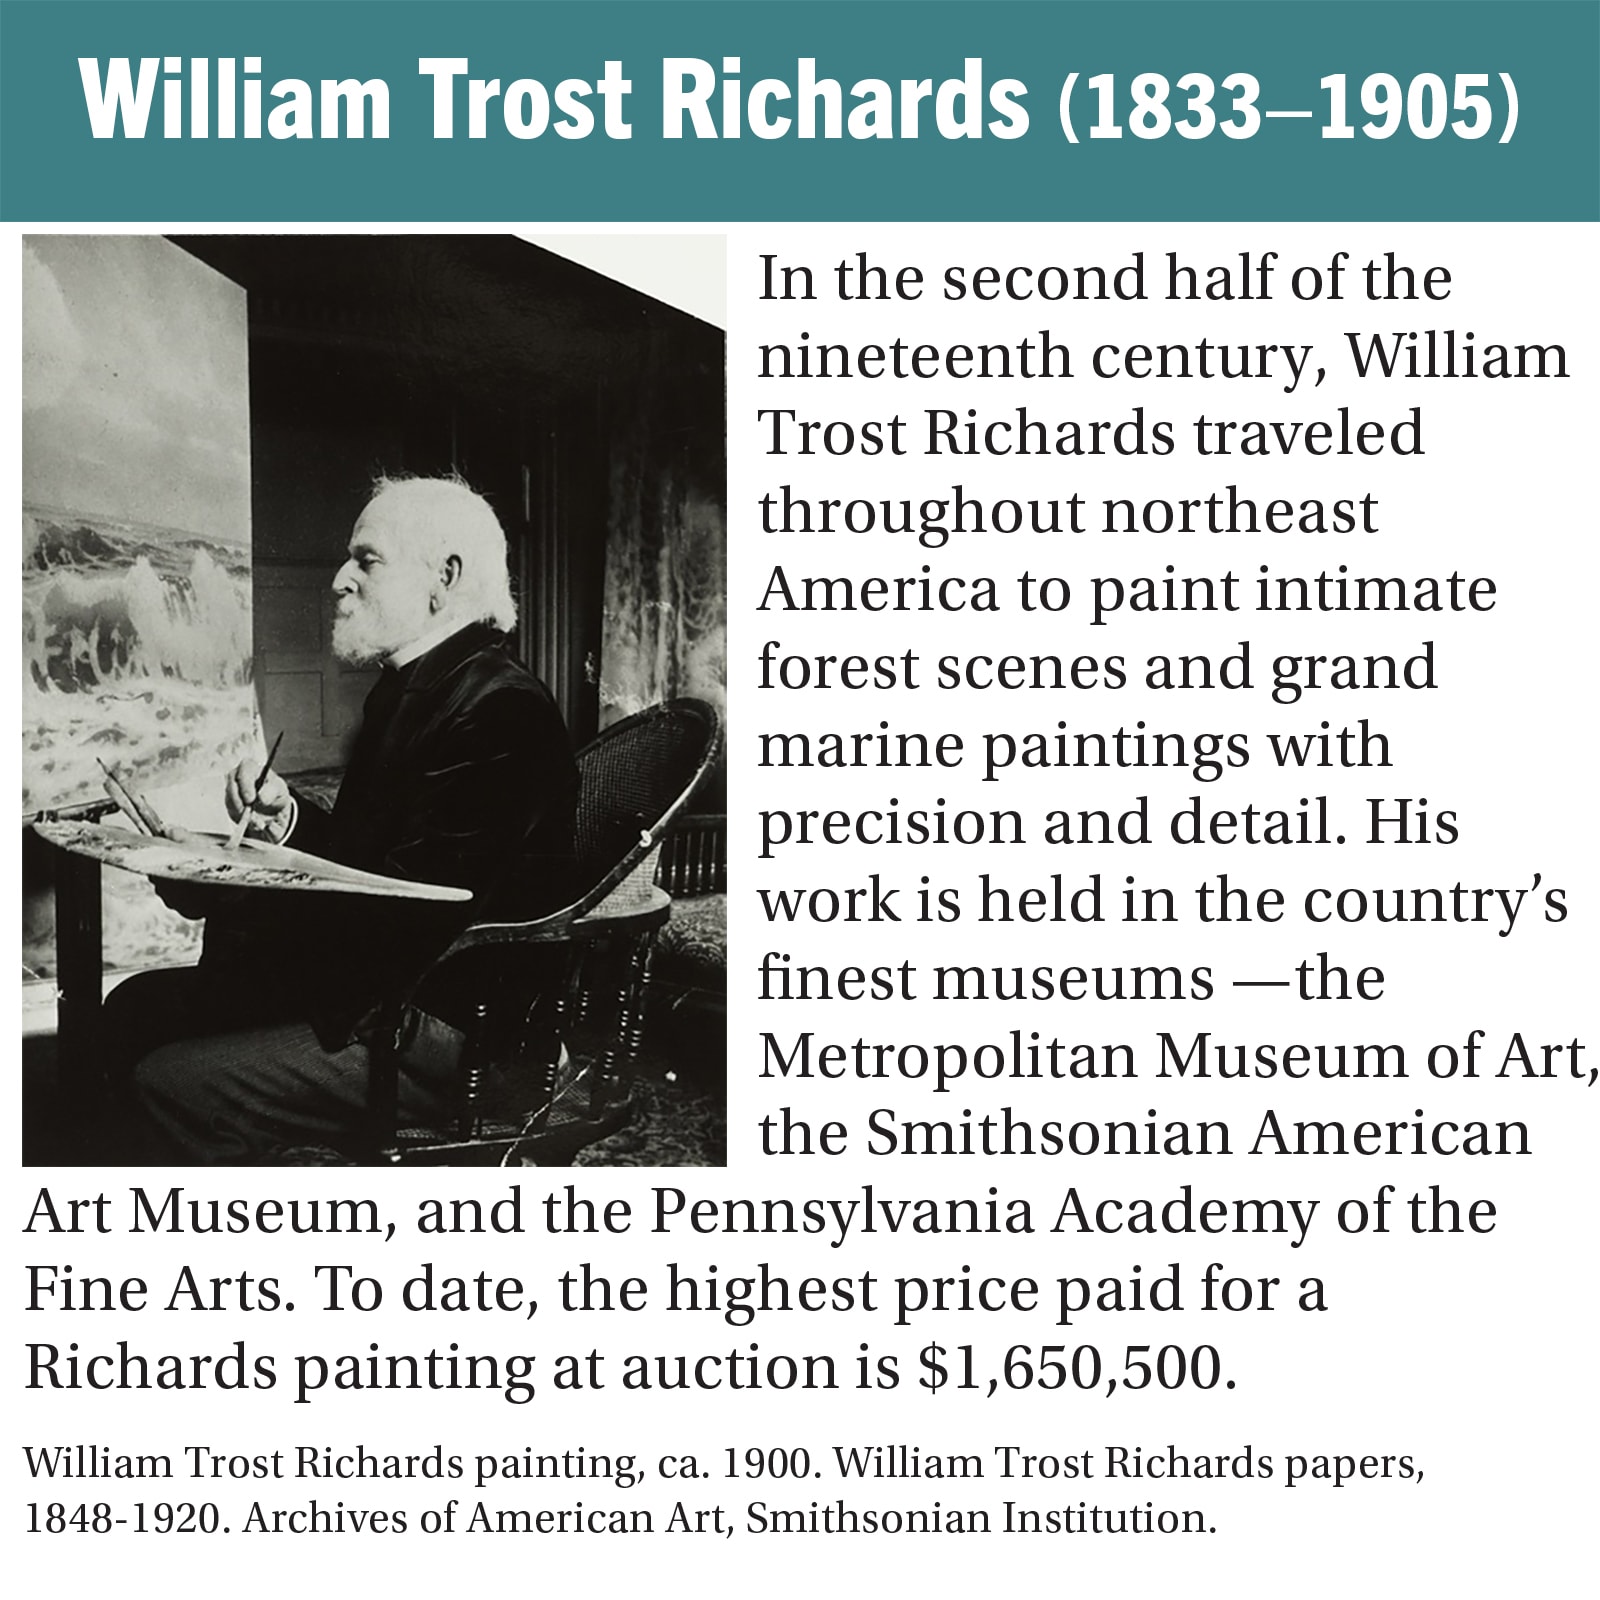 In the second half of the nineteenth century, William Trost Richards traveled throughout northeast America to paint intimate forest scenes and grand marine paintings with precision and detail. His work is held in the country’s finest museums —the Metropolitan Museum of Art, the Smithsonian American Art Museum, and the Pennsylvania Academy of the Fine Arts. To date, the highest price paid for a Richards painting at auction is  alt=